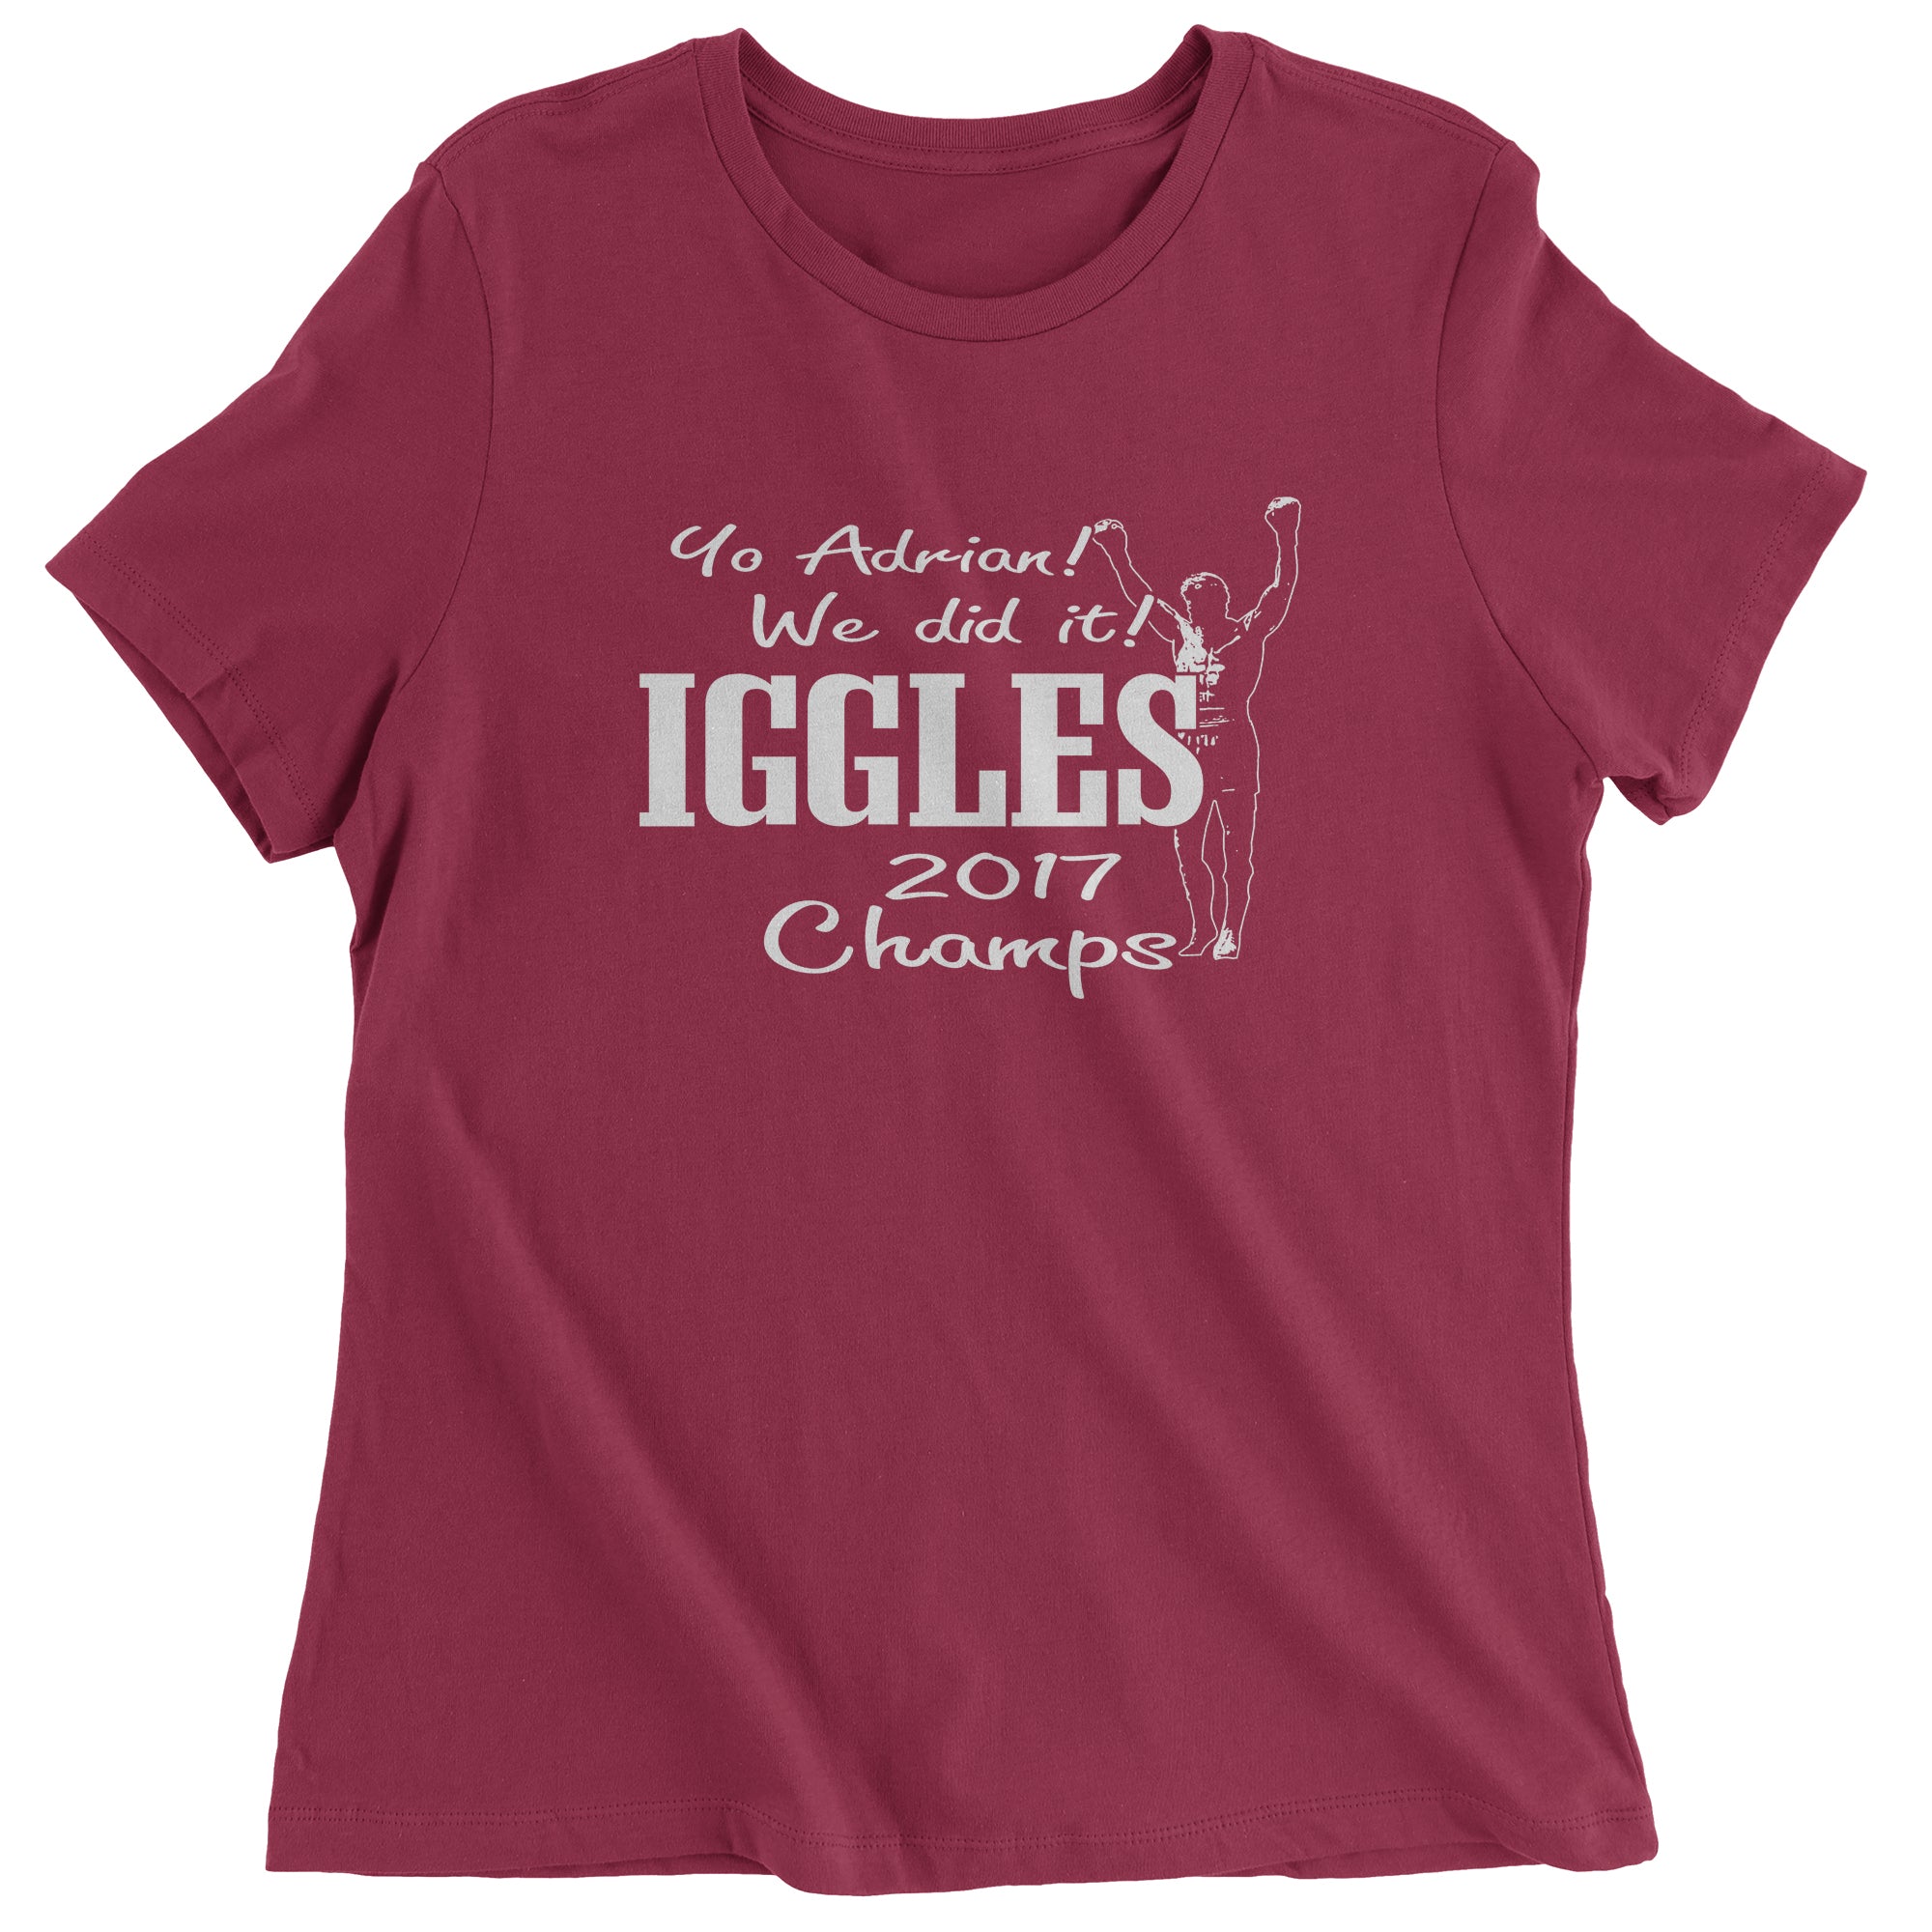 Philly Iggles Football Champs 2017 Women's T-Shirt